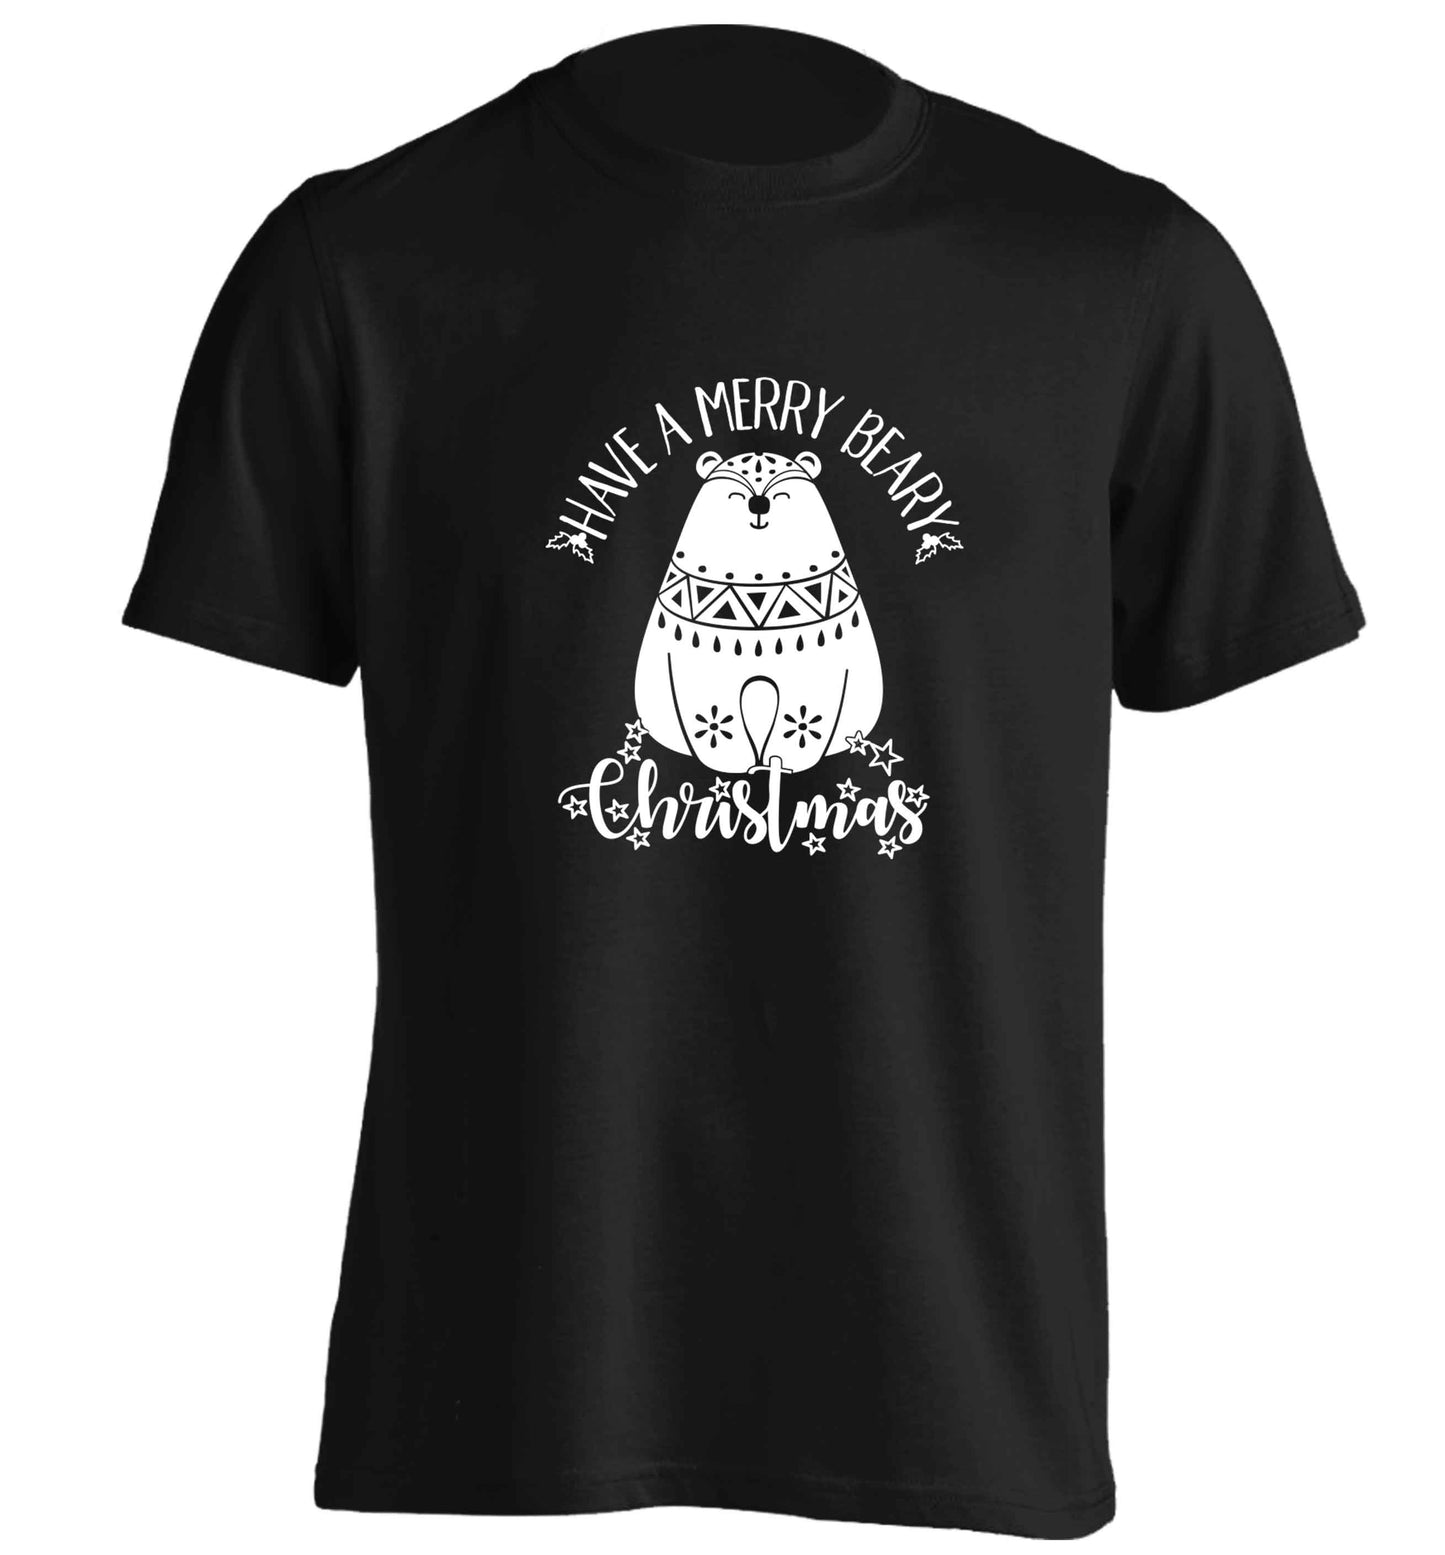 Have a merry beary Christmas adults unisex black Tshirt 2XL